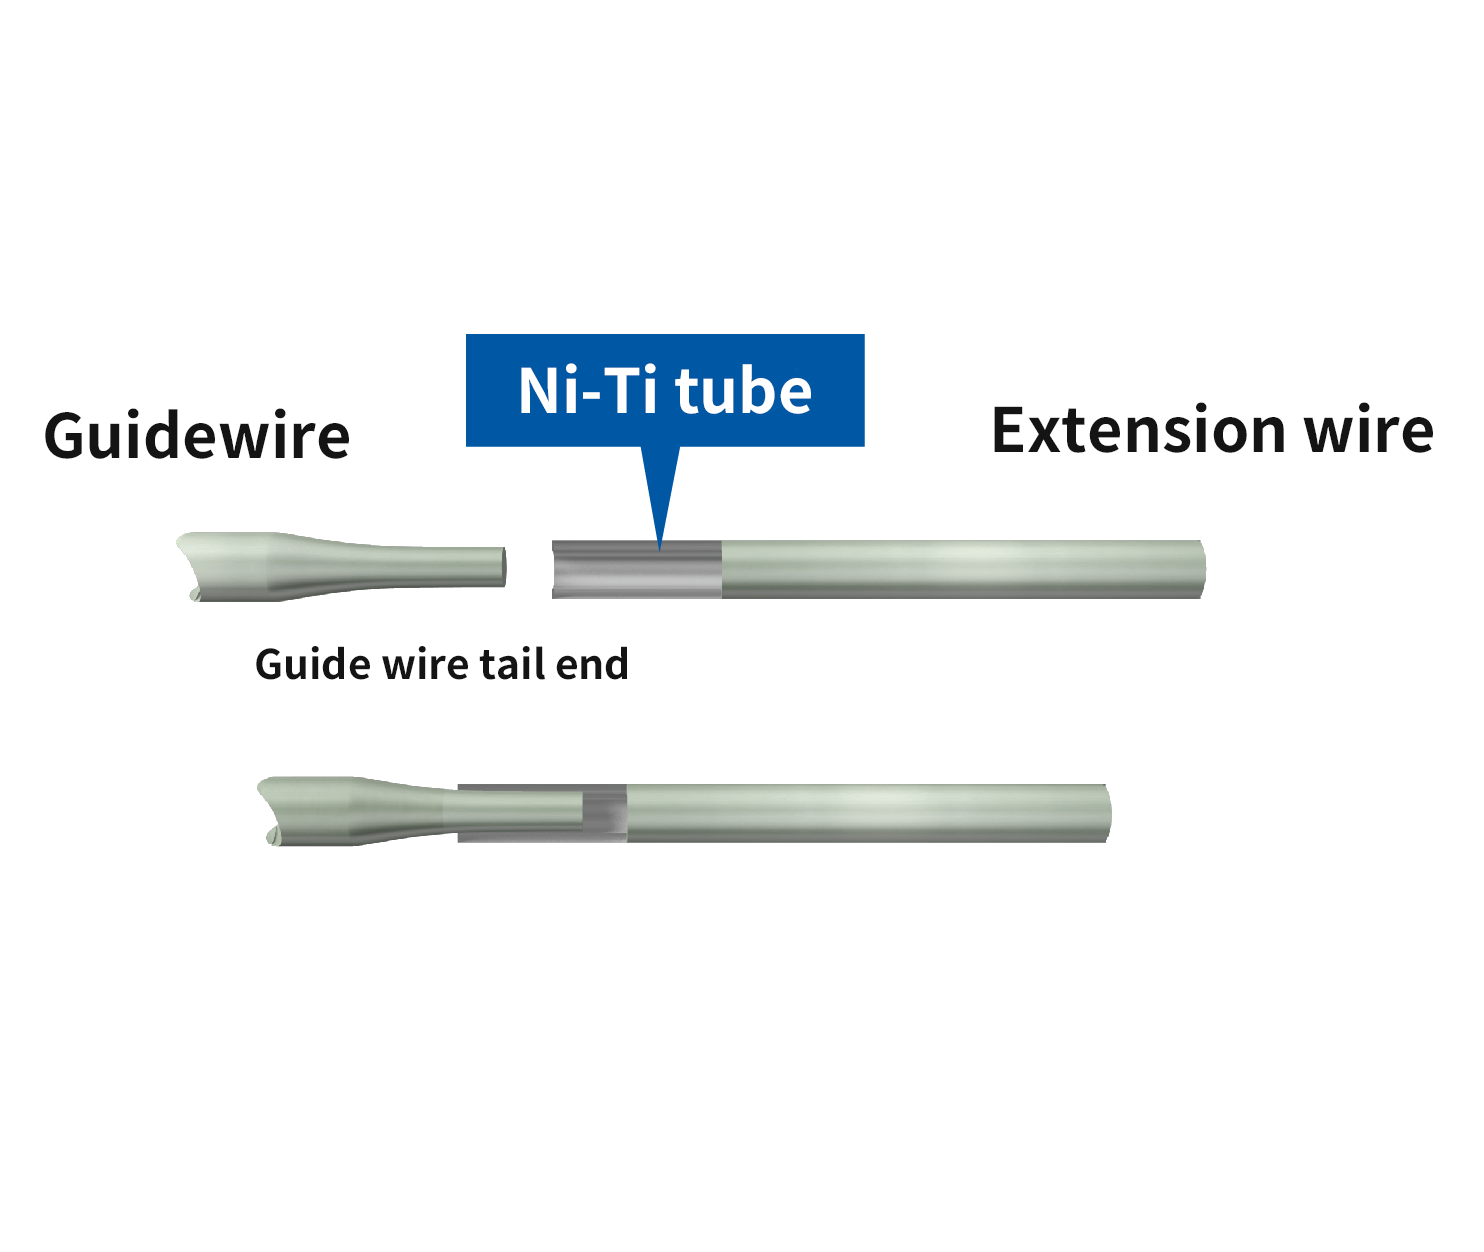 Extension wire